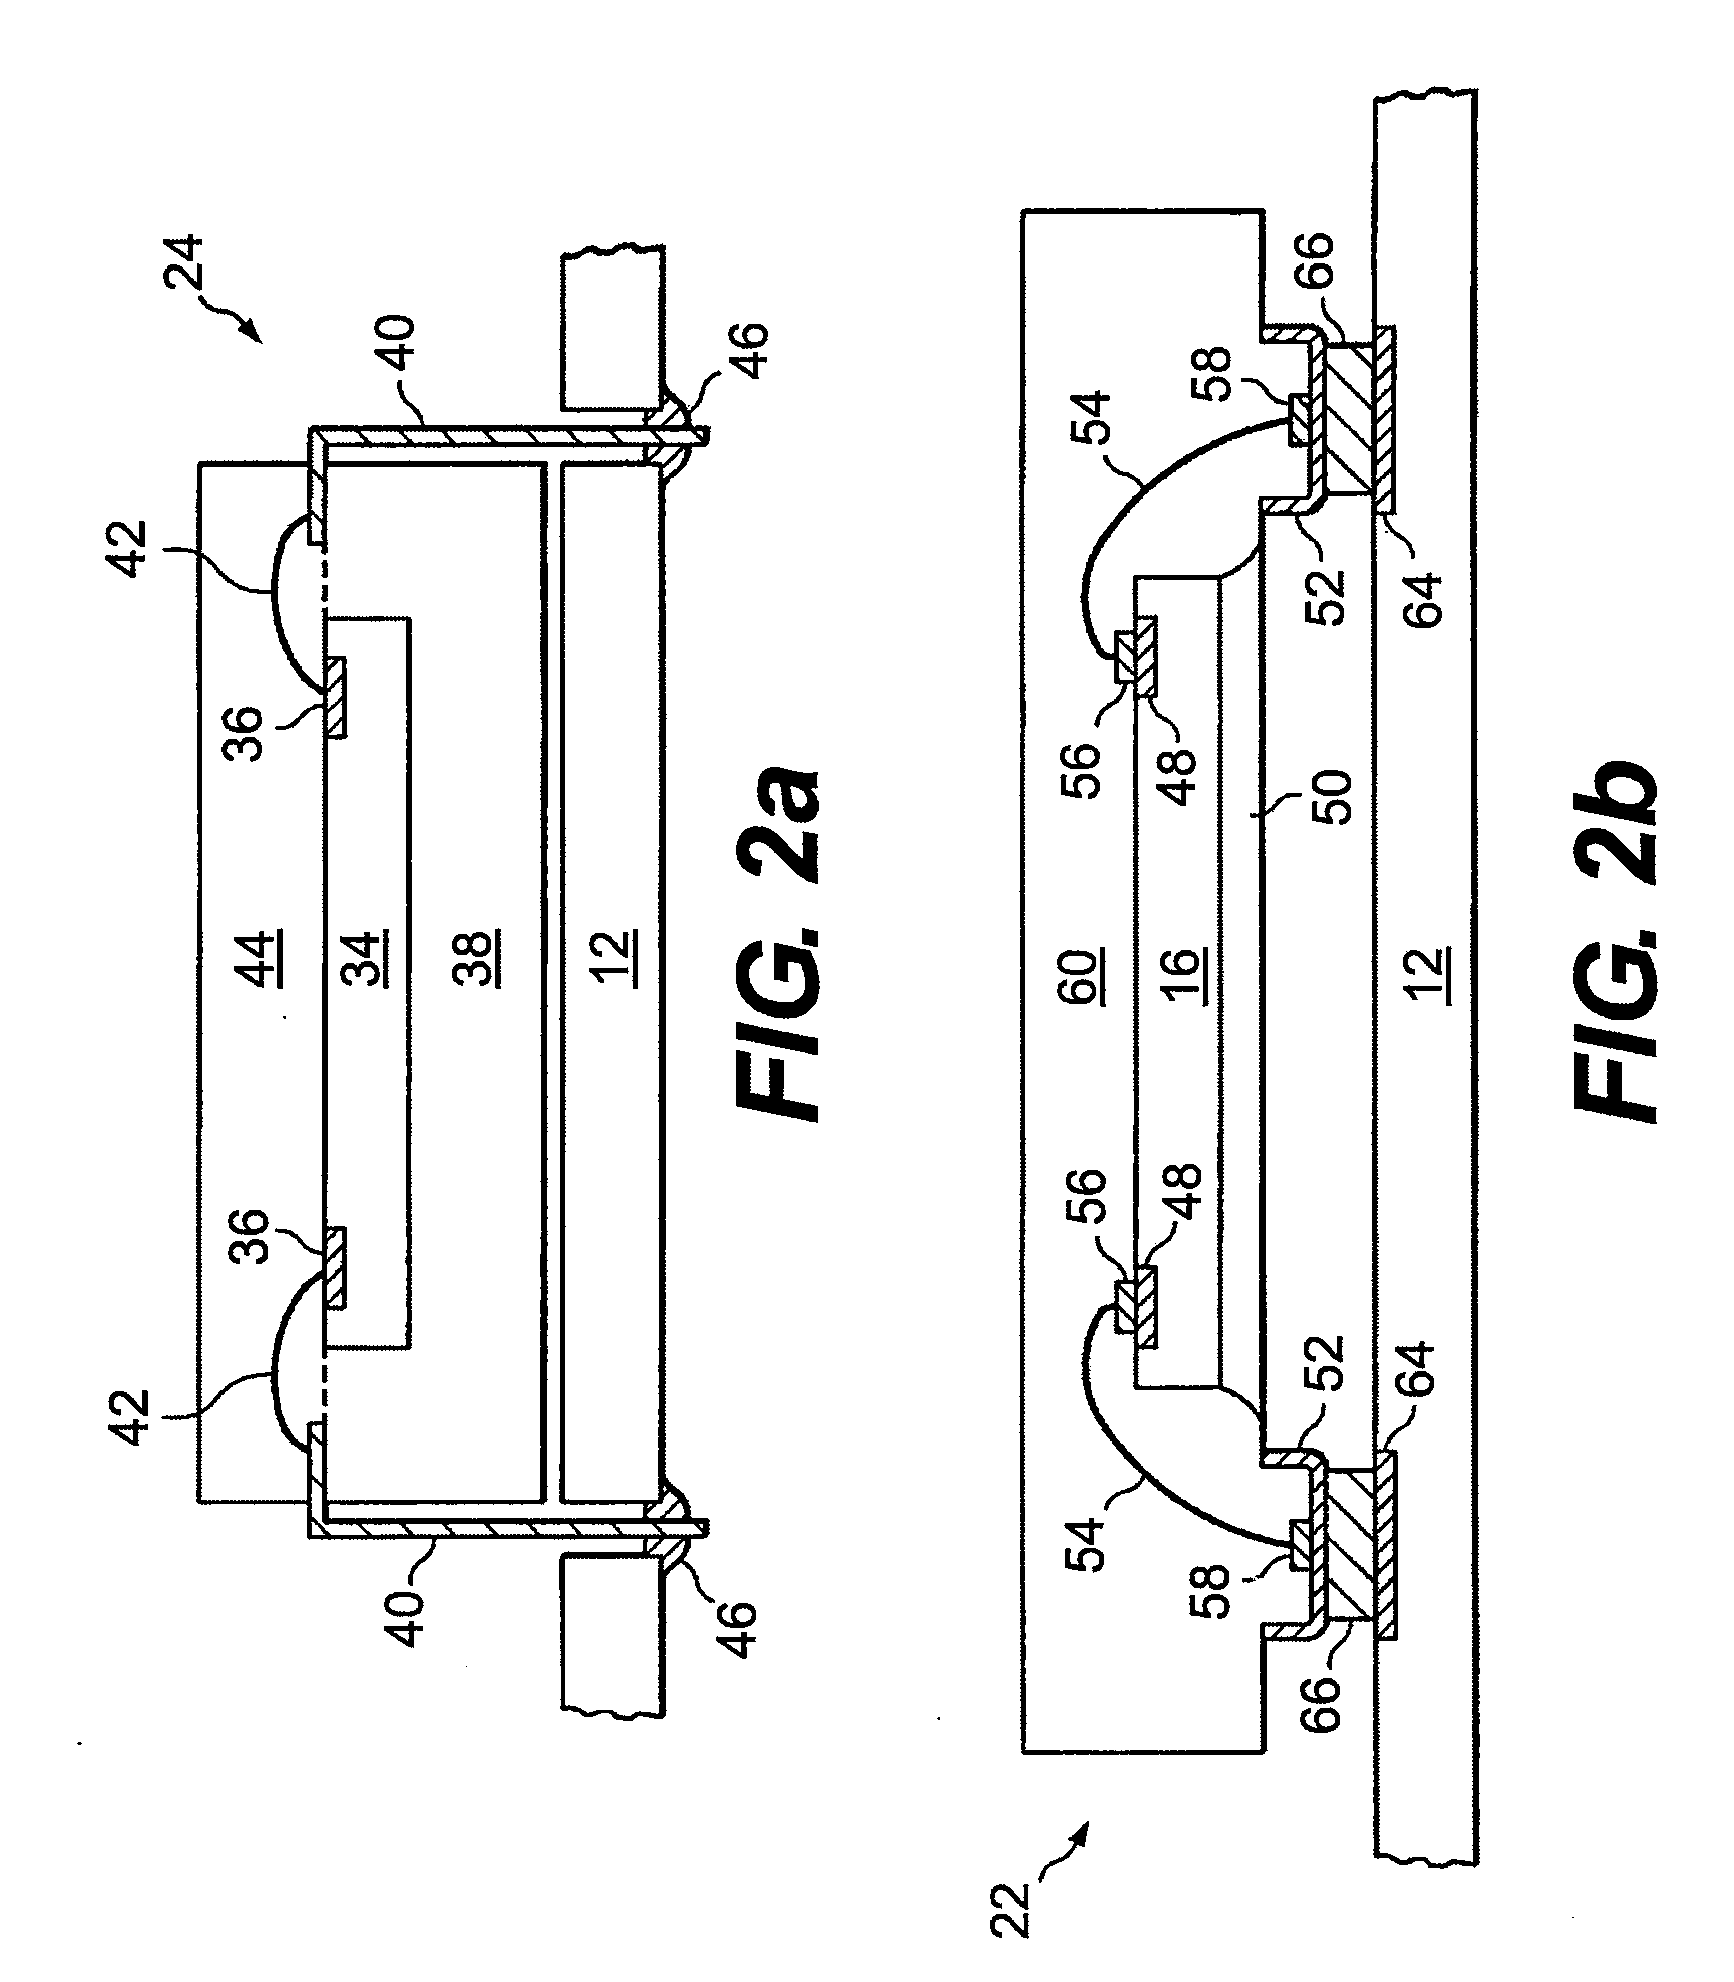 Semiconductor Device and Method of Forming Interconnect Structure in Non-Active Area of Wafer